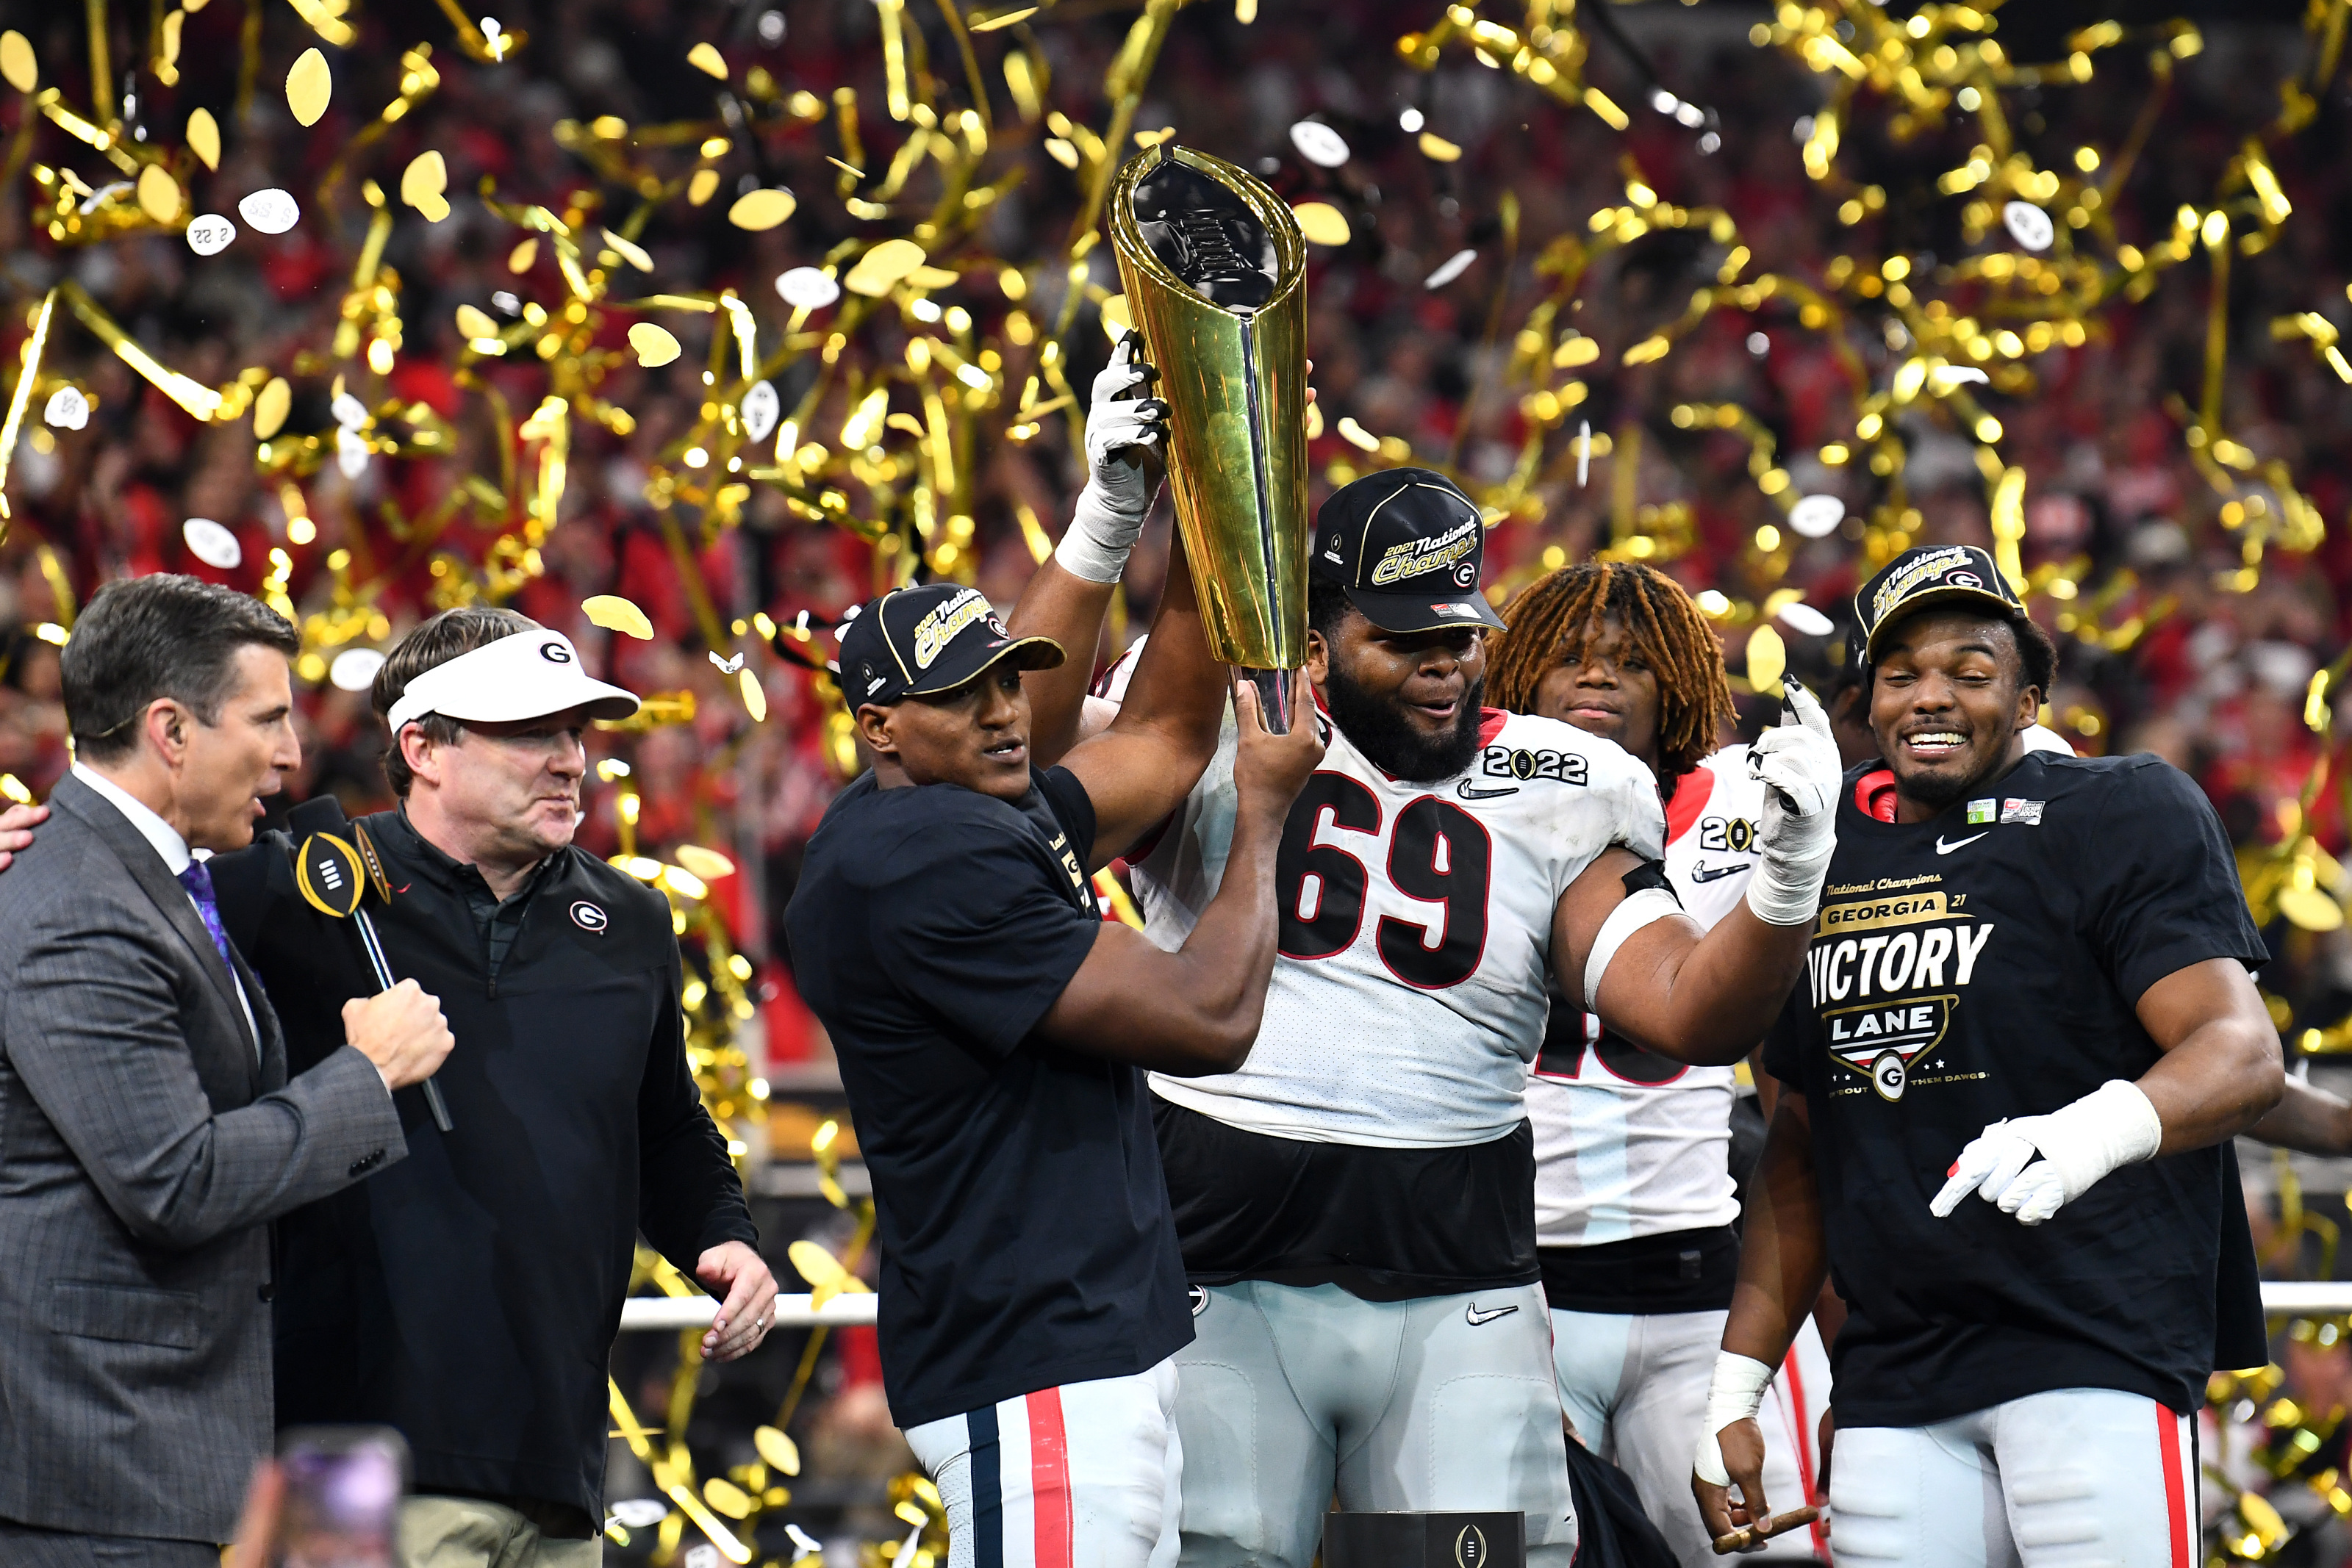 Twitter reacts to Georgia football winning the national championship